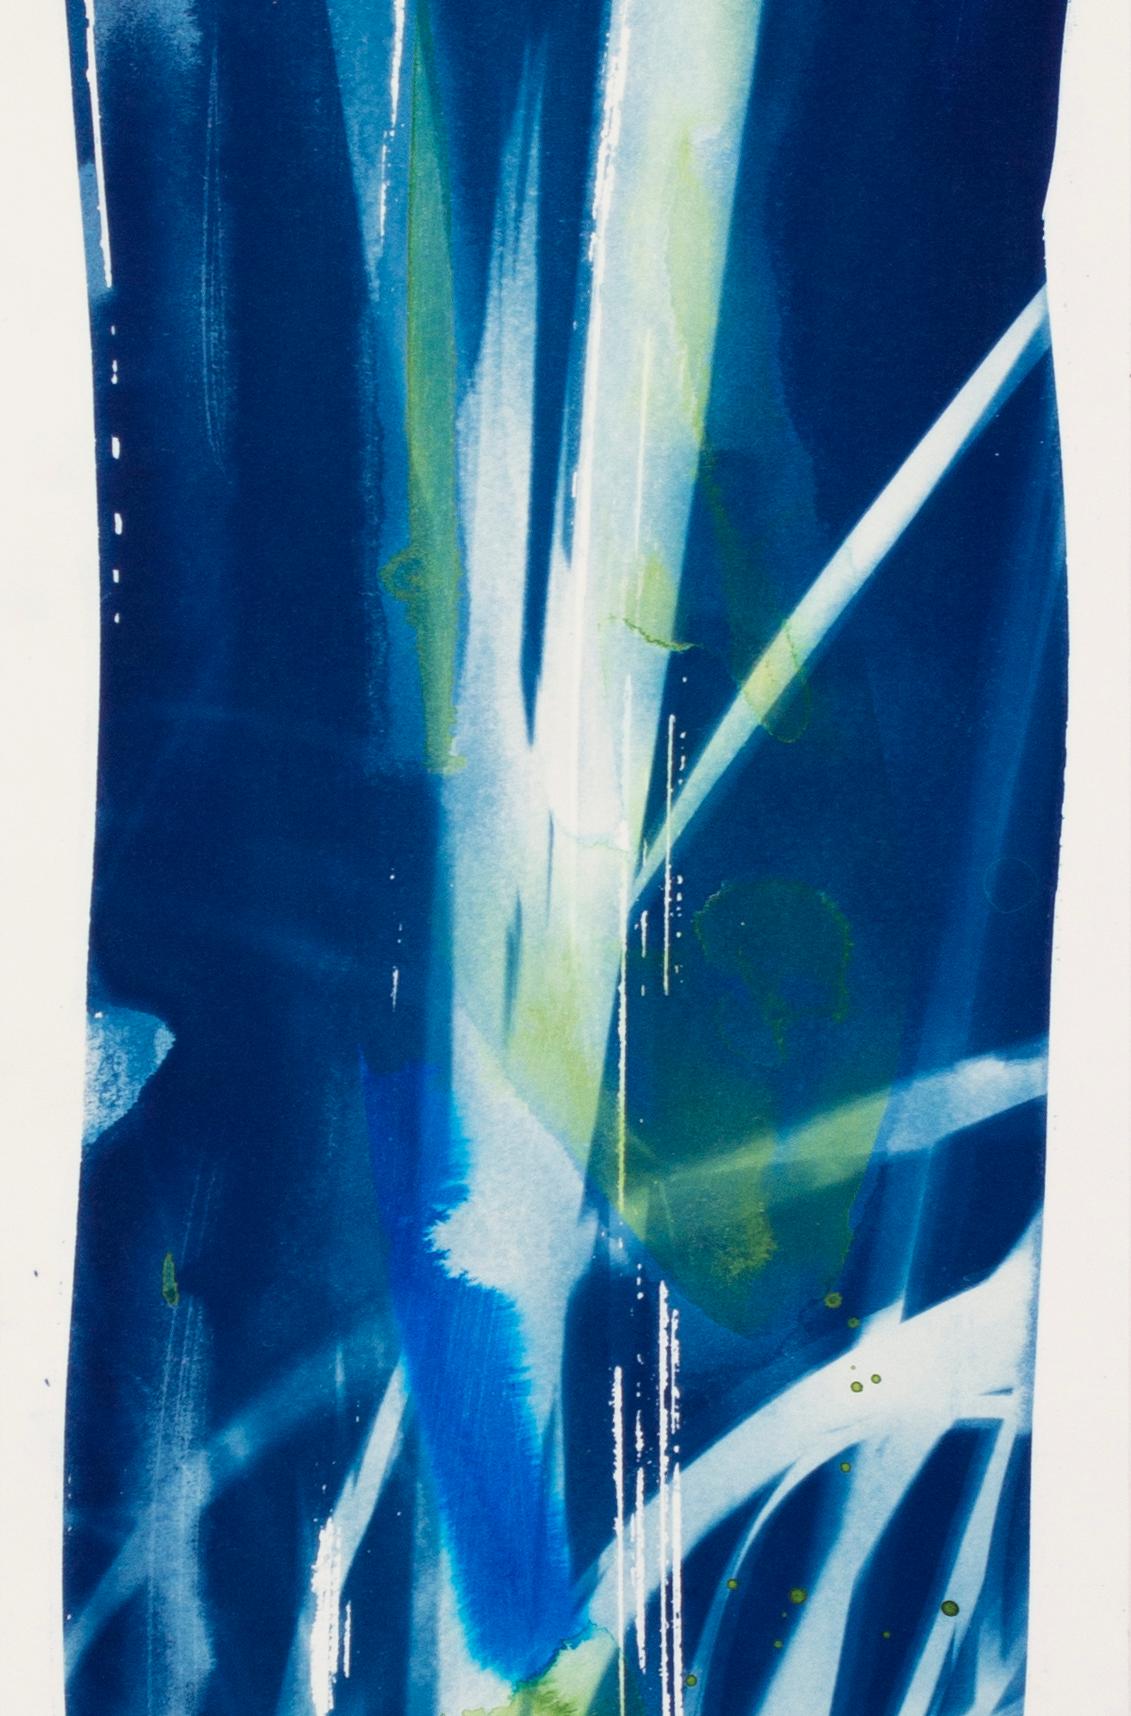 ''Except The Shadows' is a mixed media painting on board, with deep blue tones of cyanotype solution used as a painting medium, together with vibrant, richly layered colours of acrylic ink. This original, abstract impressionist painting is from a